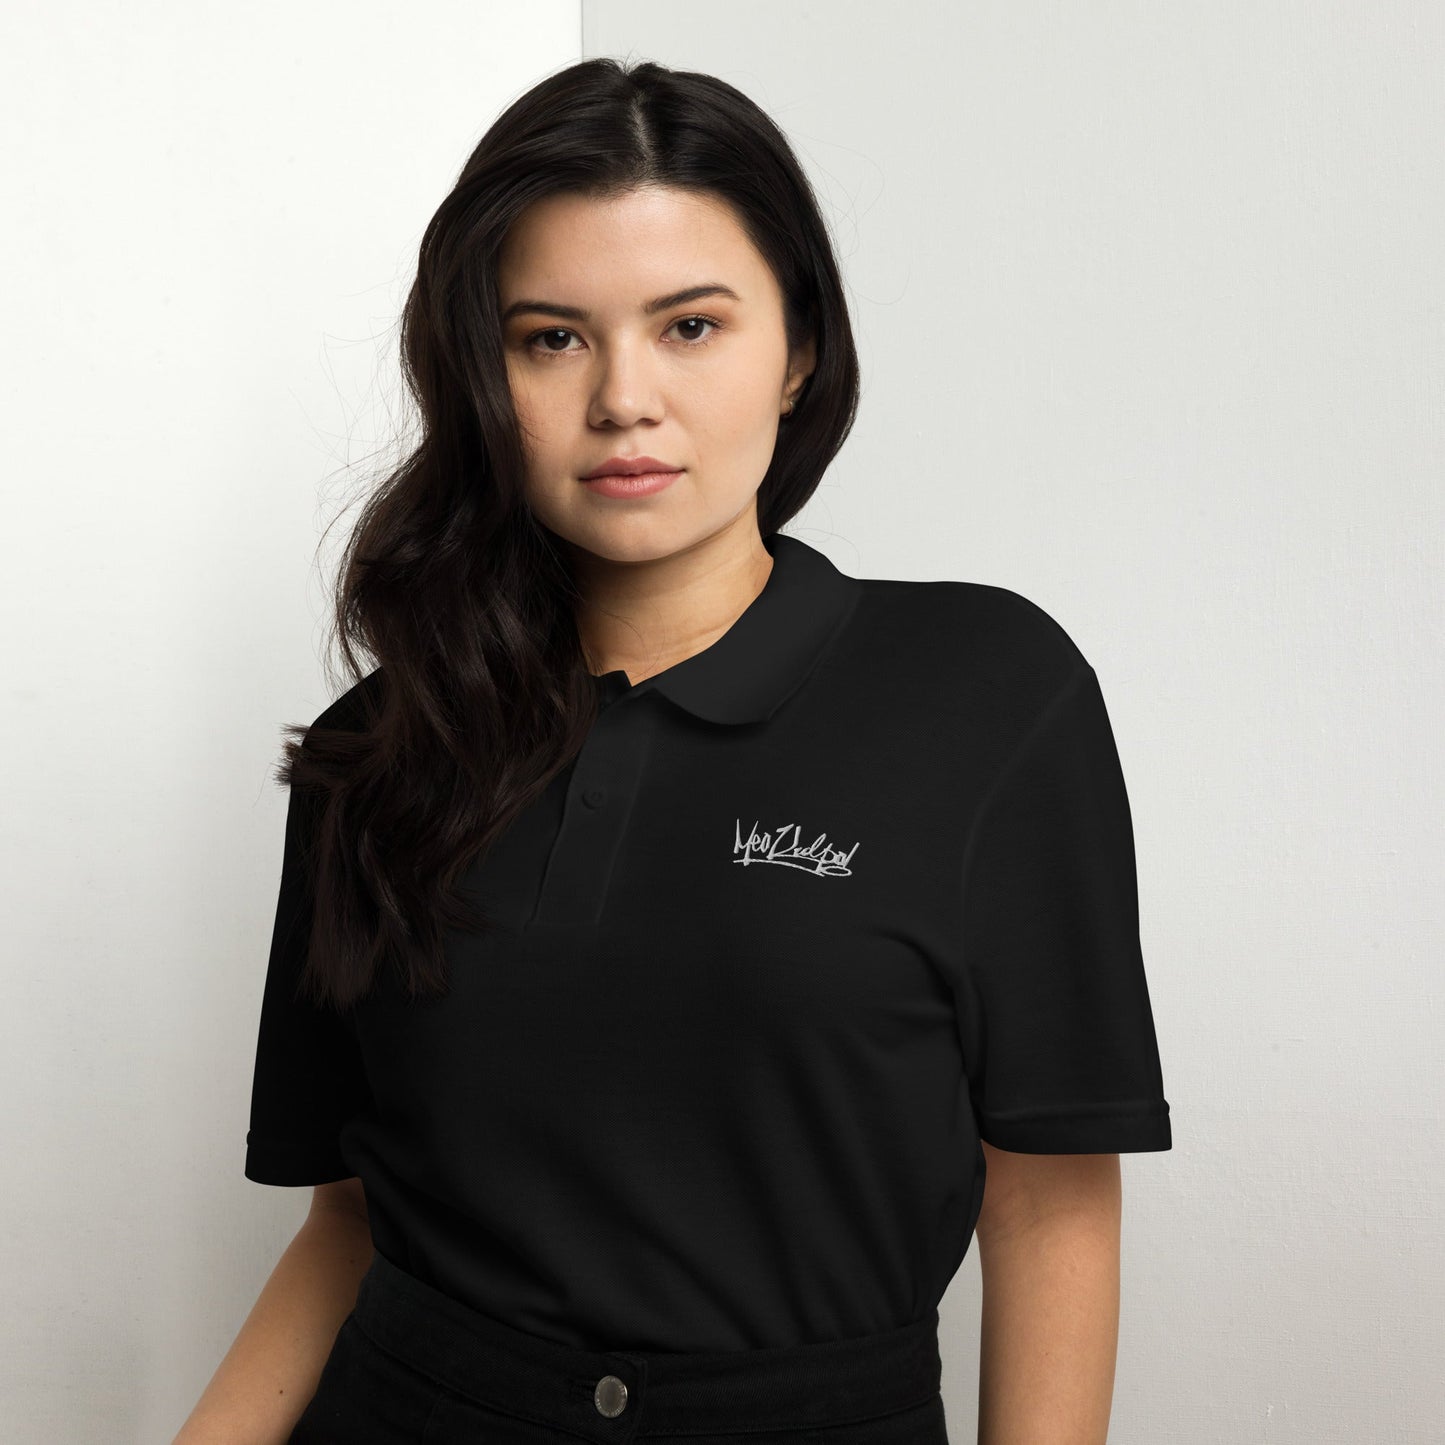 Girl with dark hair wearing Polo.Make a statement in timeless black with the MeaKulpa Unisex Pique Polo Shirt. Crafted from durable ring-spun cotton, this shirt offers a comfortable and flattering fit. Its classic cut and crisp collar ensure versatility, allowing you to dress it up or down with ease. Perfect for both casual and formal occasions, this black polo exudes sophistication and style.